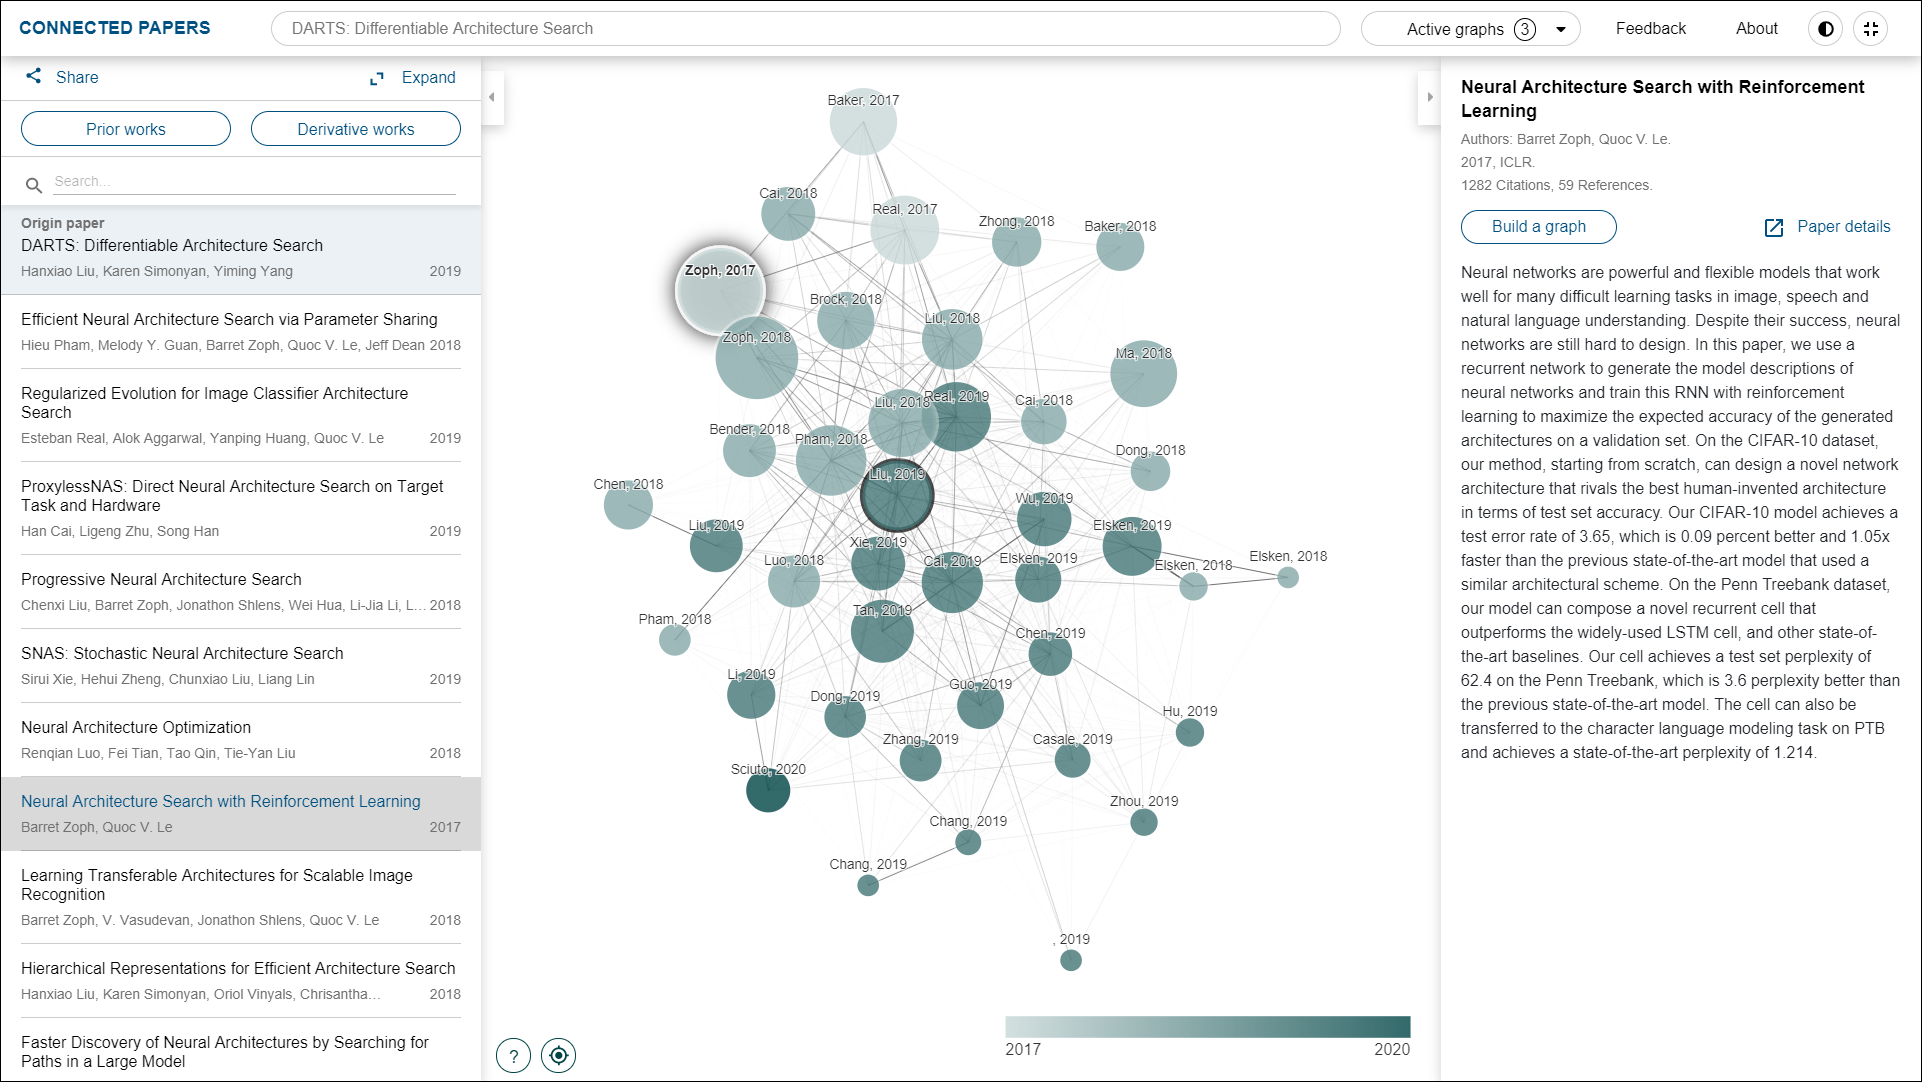 Announcing Connected Papers — a visual tool for researchers to